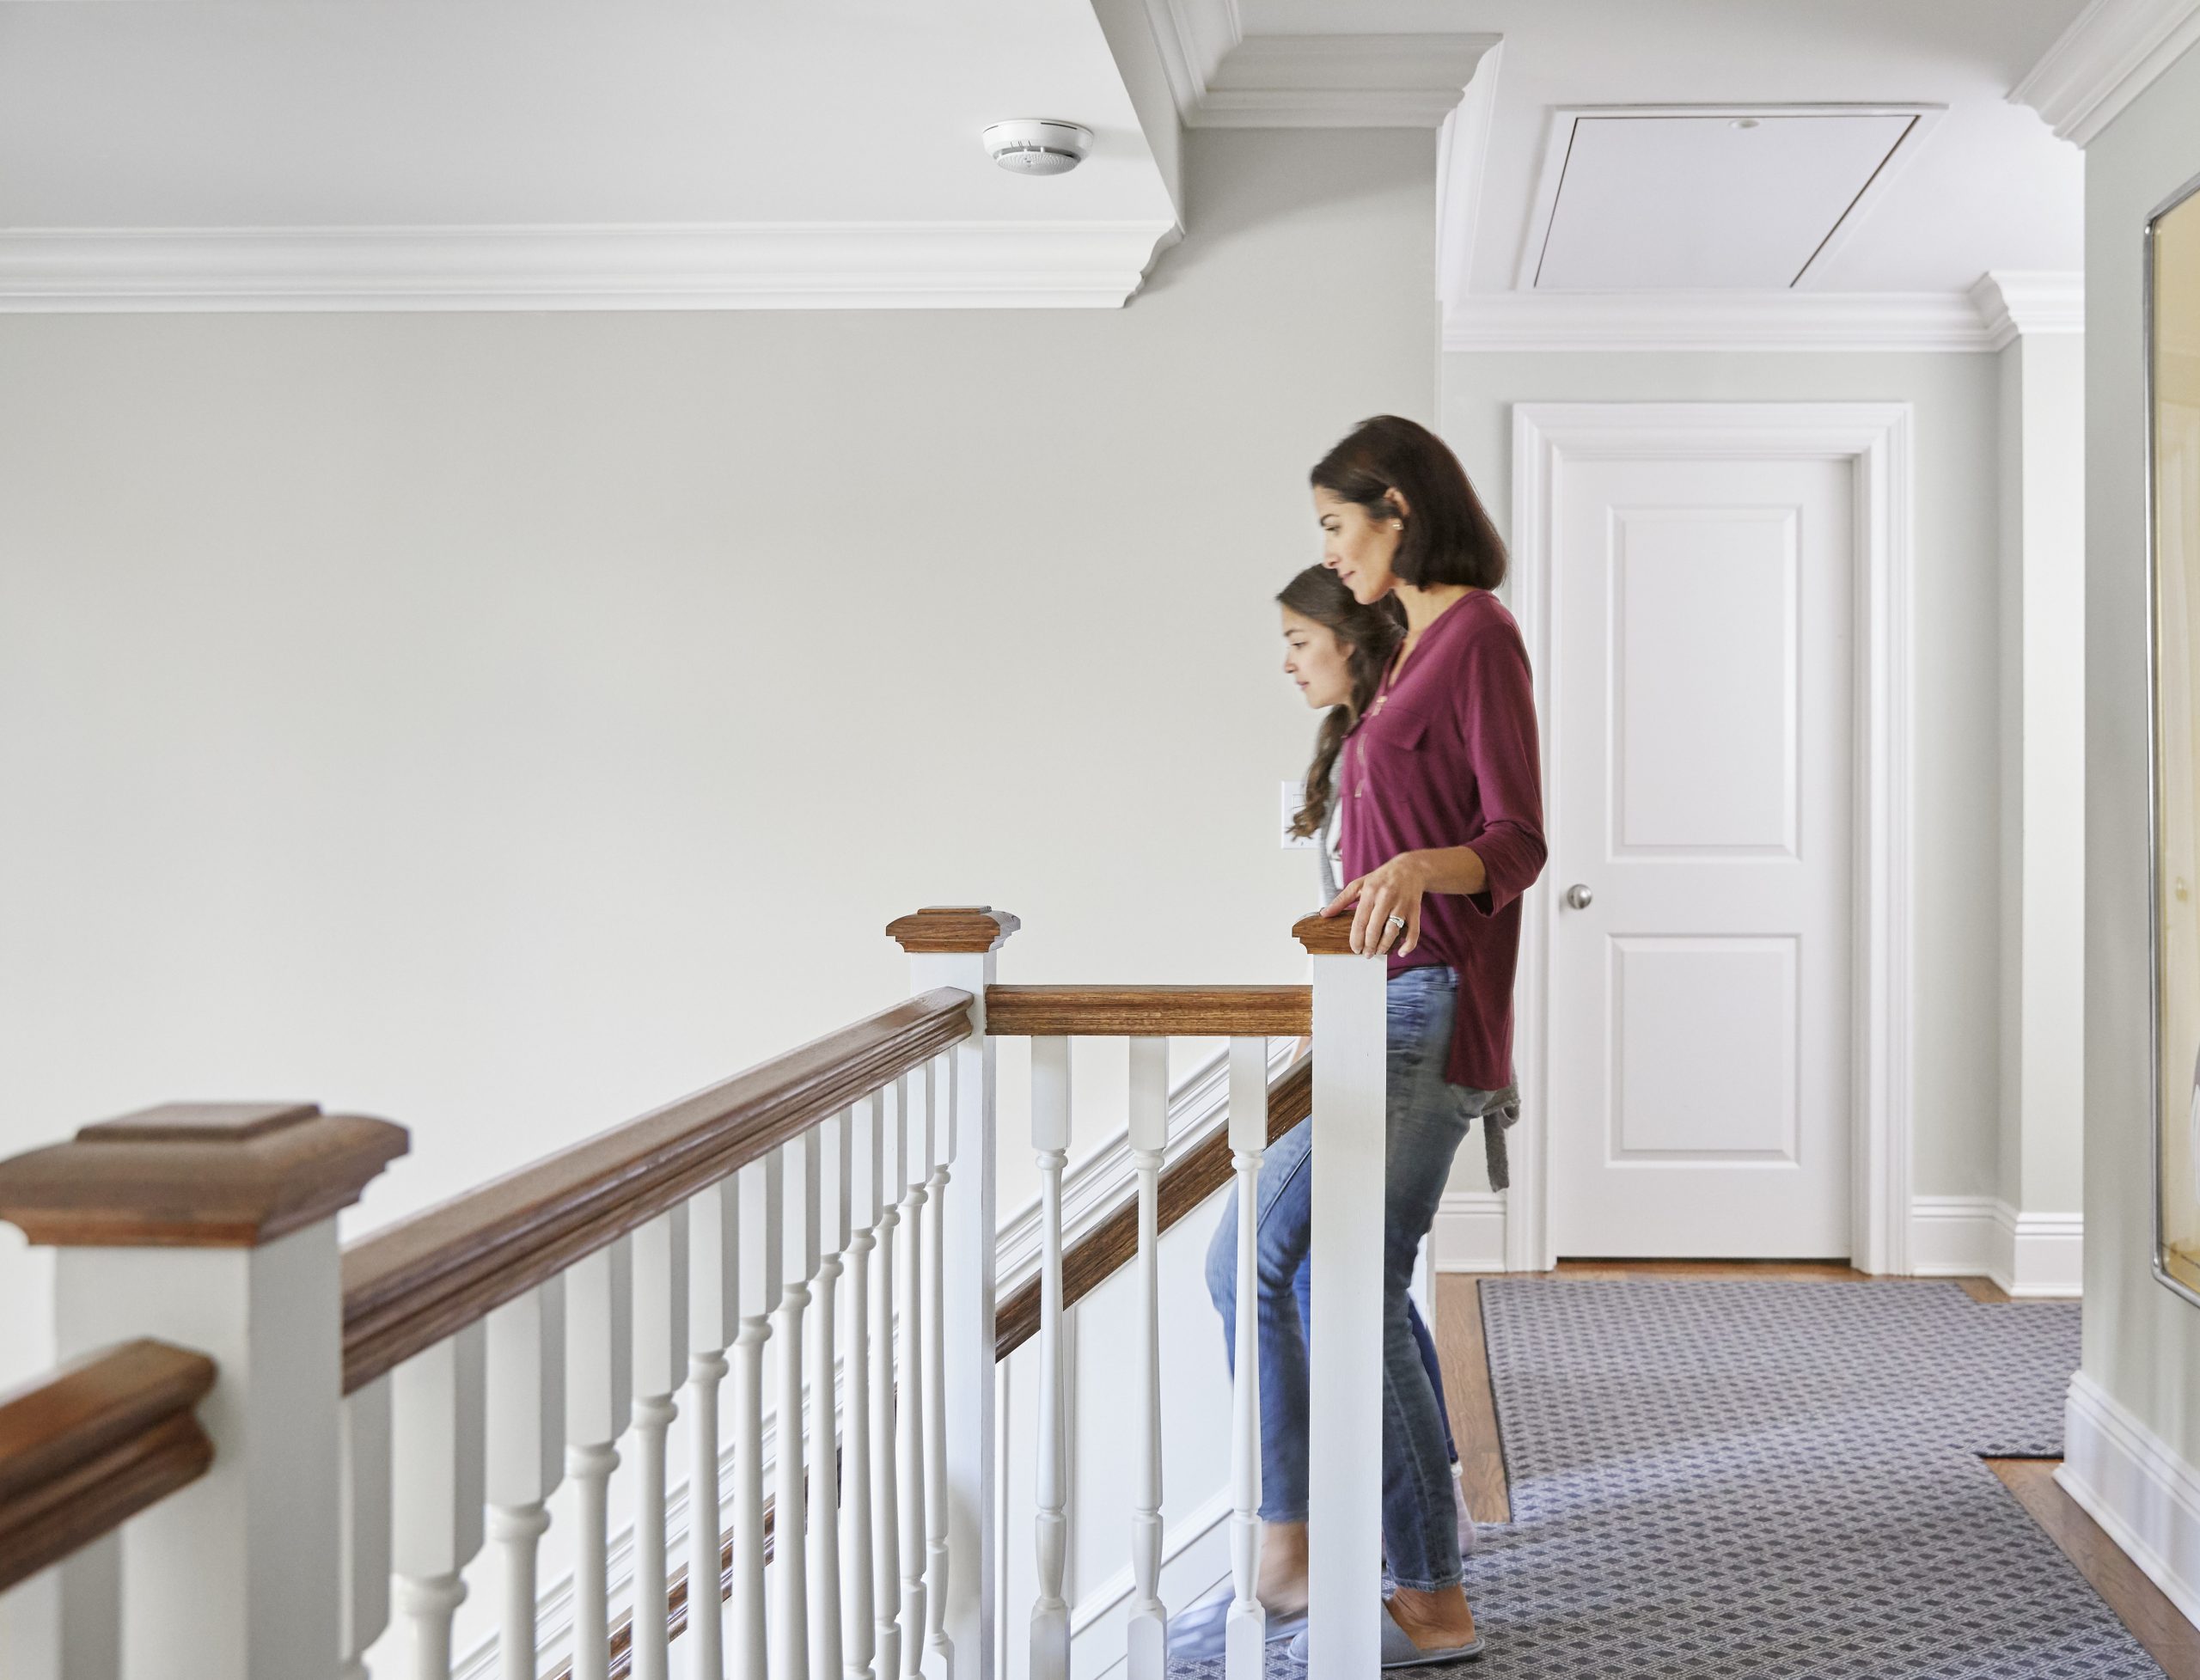 A woman and a girl walk down stairs with a carbon monoxide detector above them